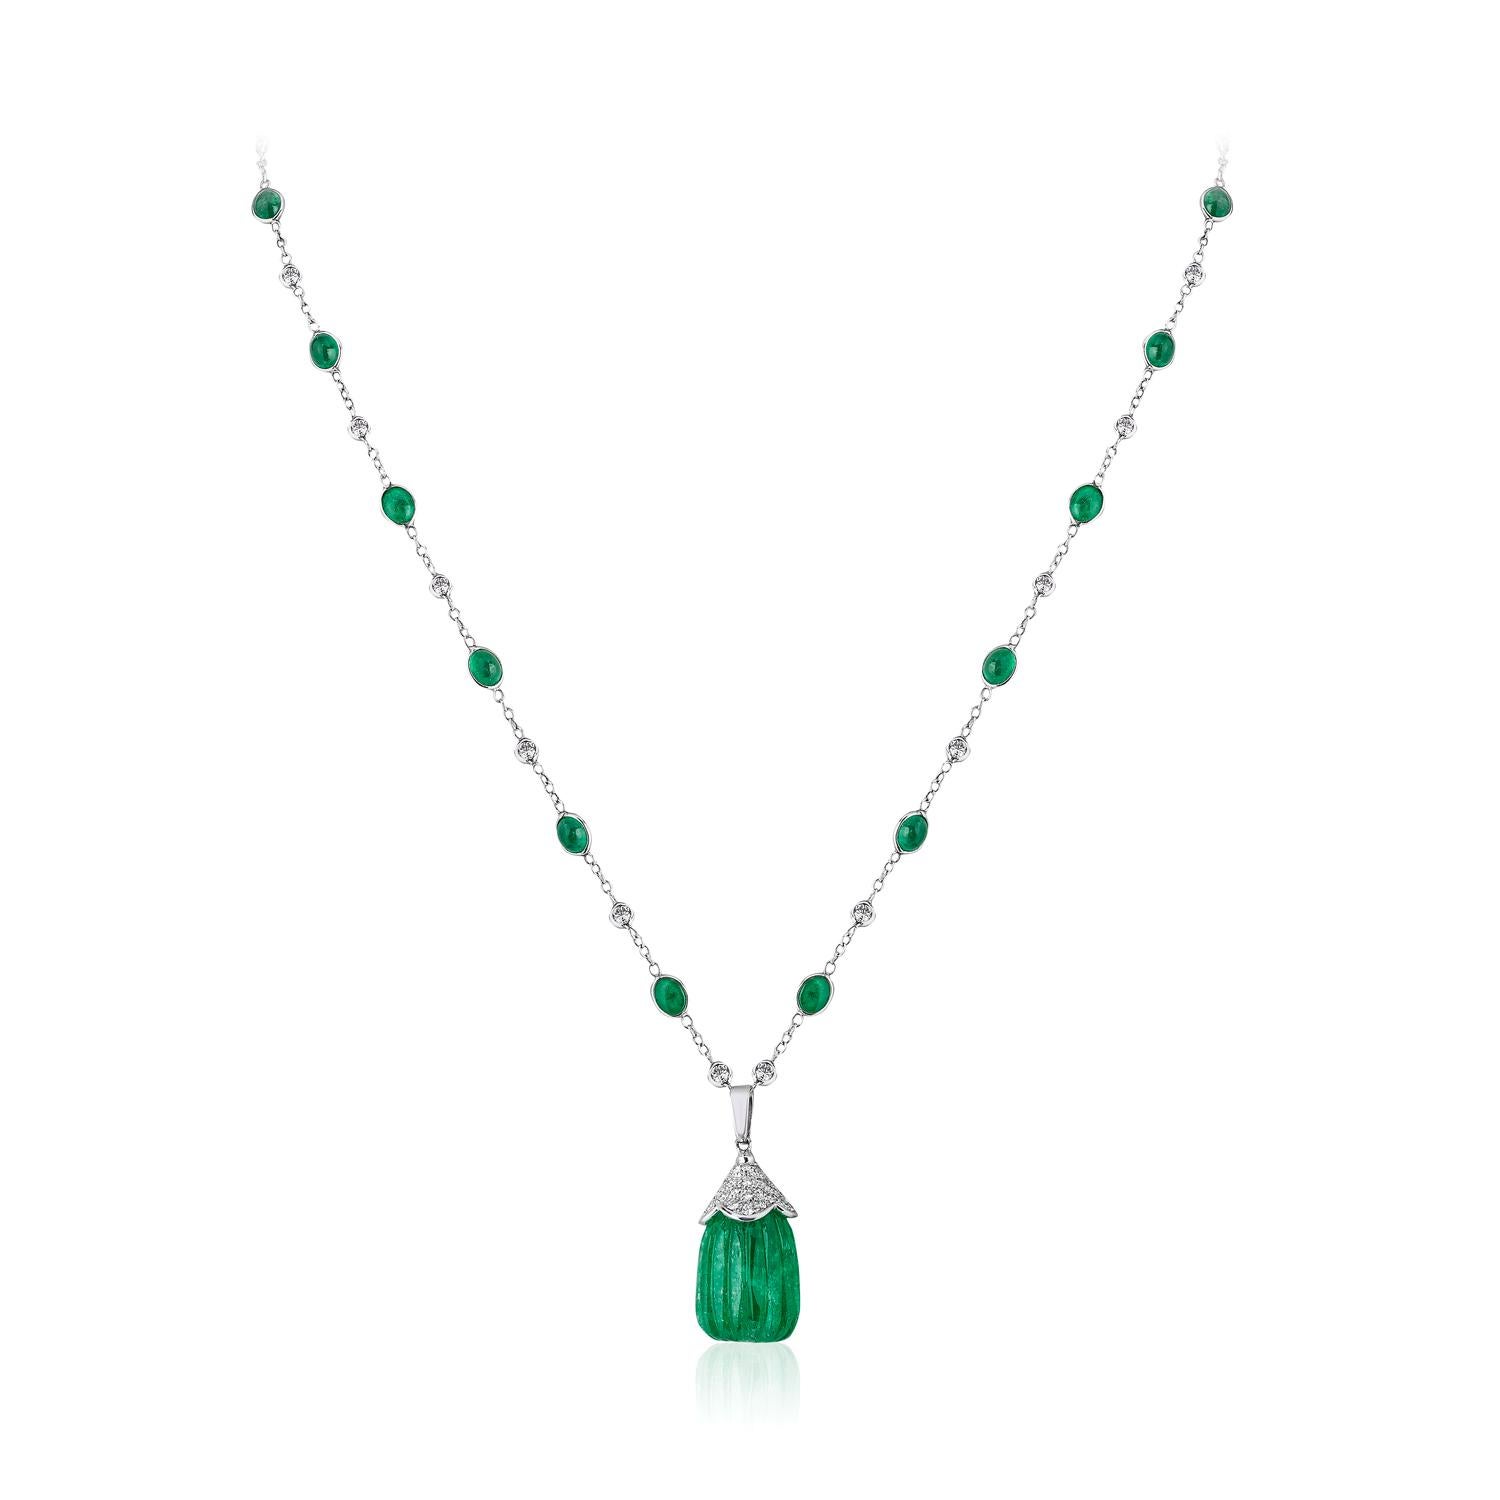 Carved Emerald Drop Pendant Emerald Cabochon and Diamond 18k Andreoli

This Andreoli pendant features a dazzling 42.95 carat carved Colombian emerald drop. The diamond by the yard contains 21.95 carat of oval emerald cabochons and the pendant is